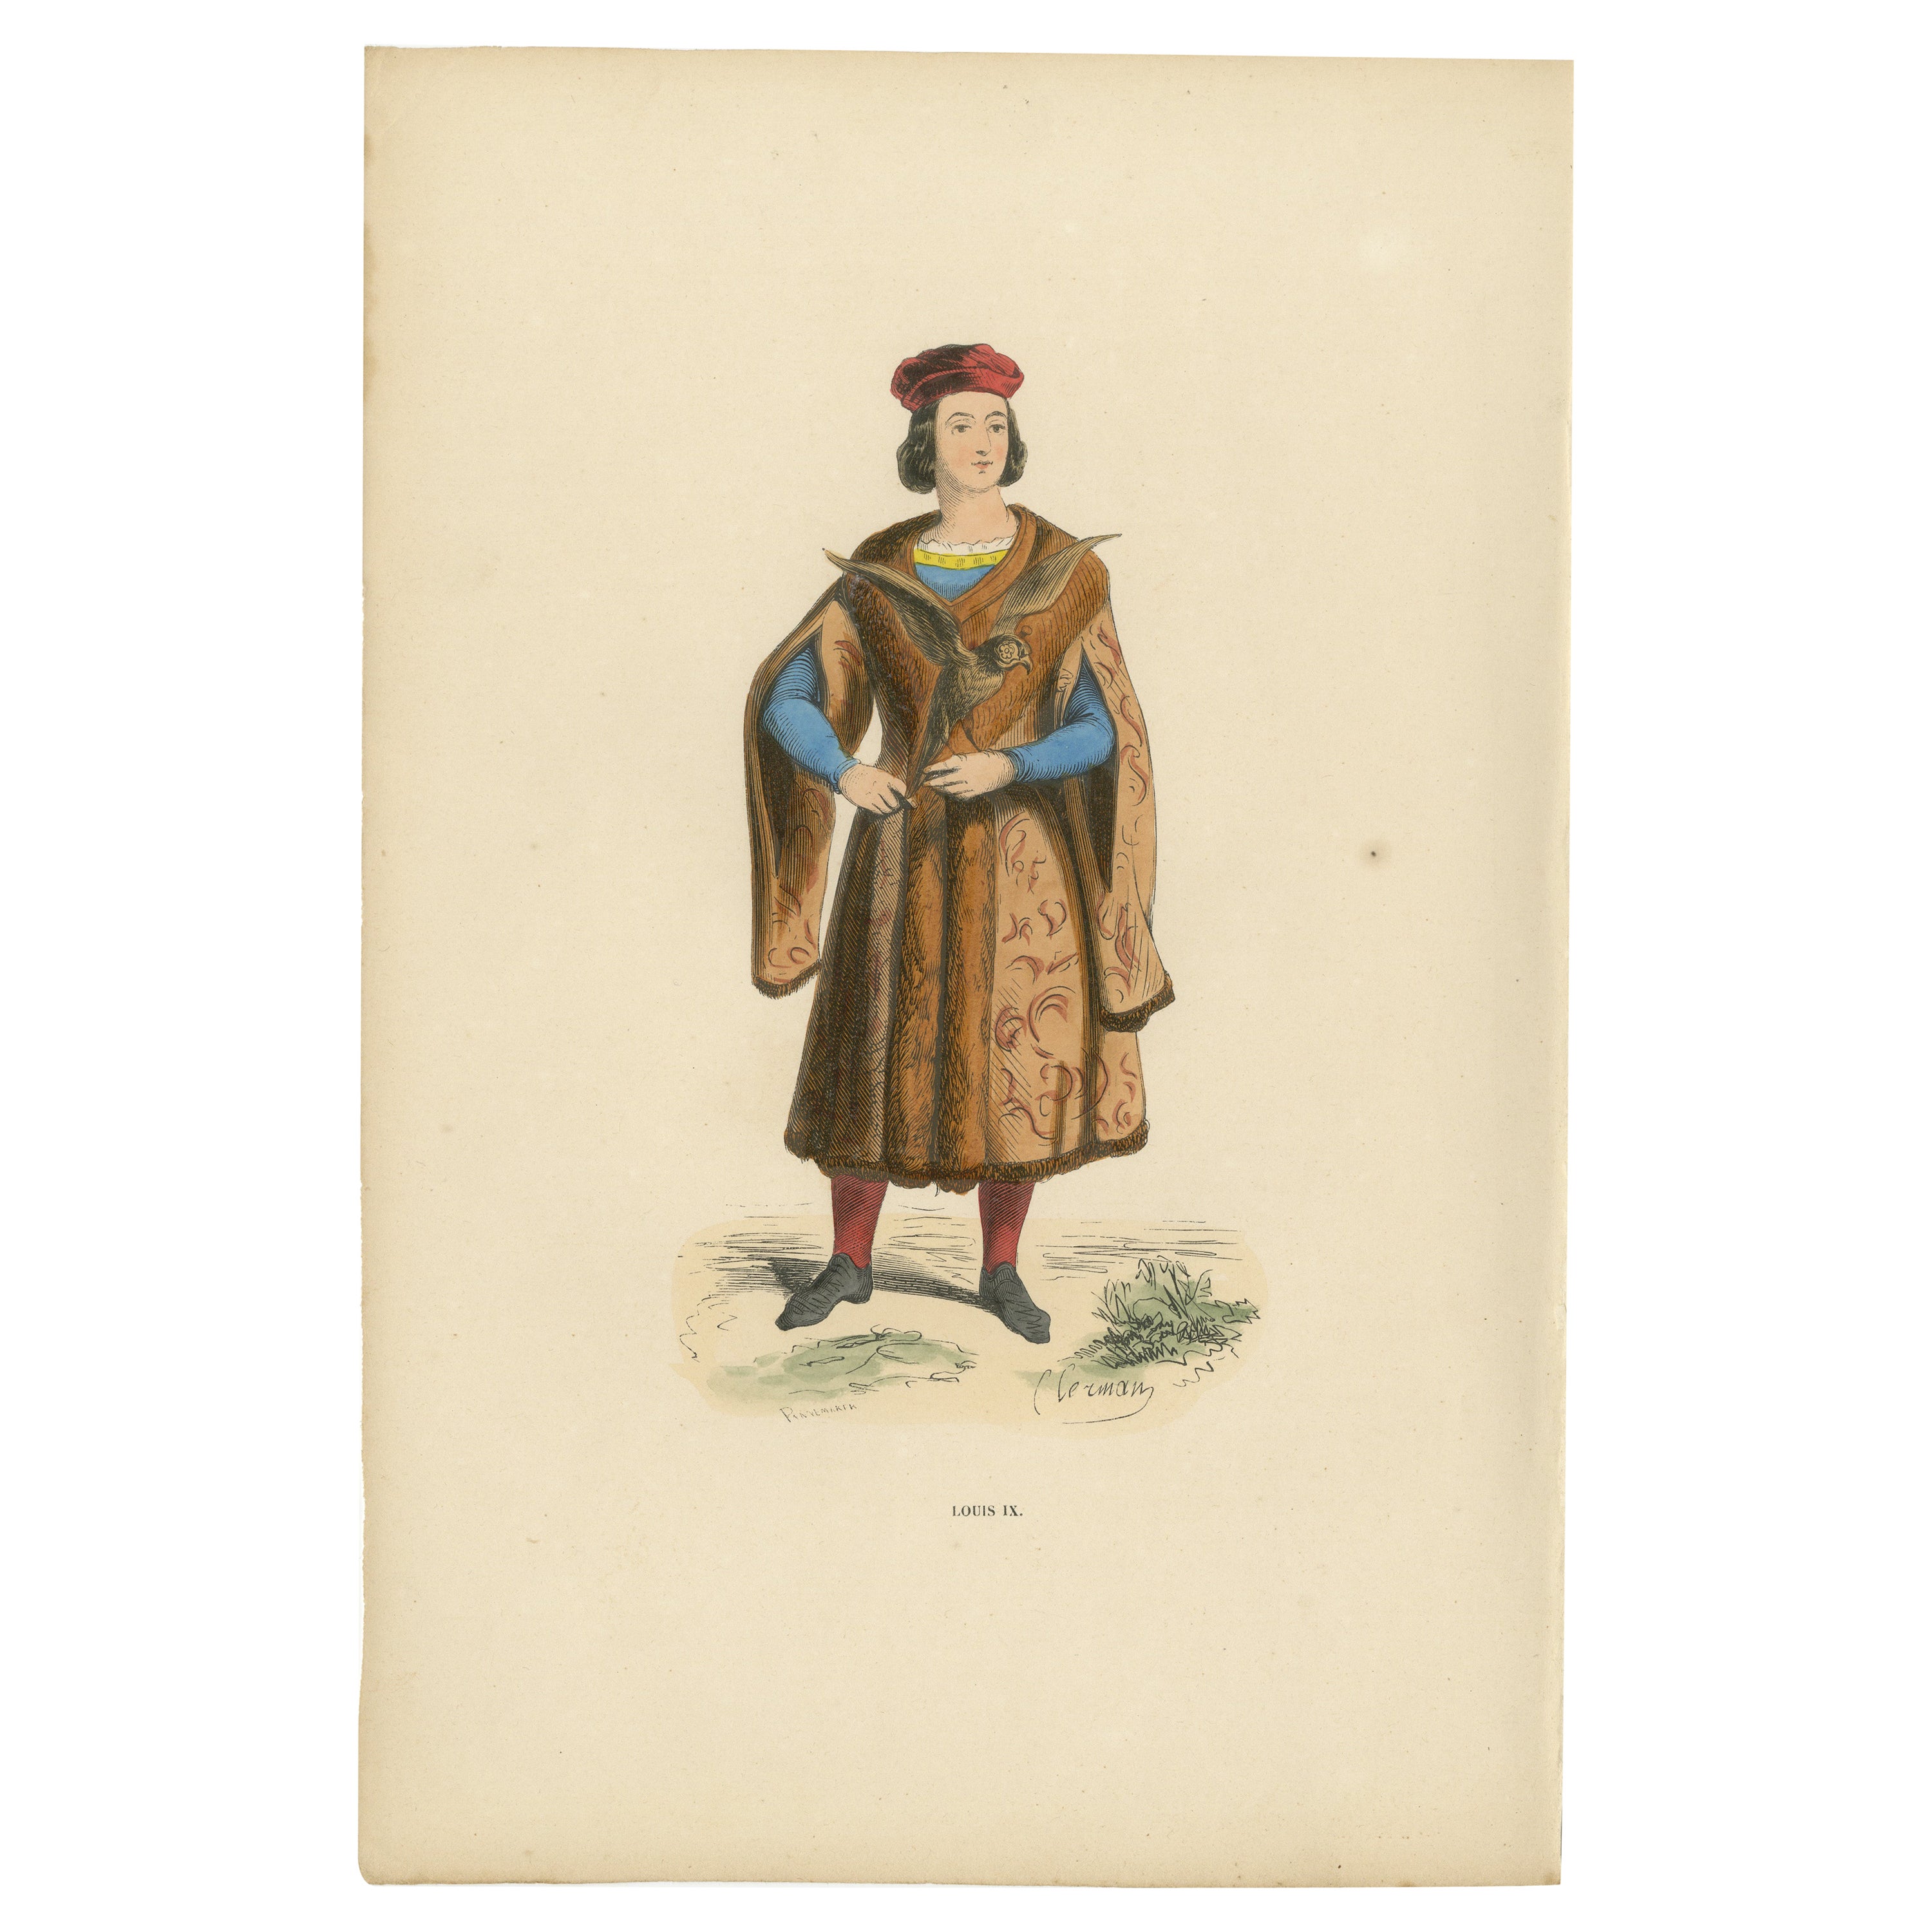 Louis IX: A Portrayal of French Royalty in Medieval Attire, Published in 1847 For Sale